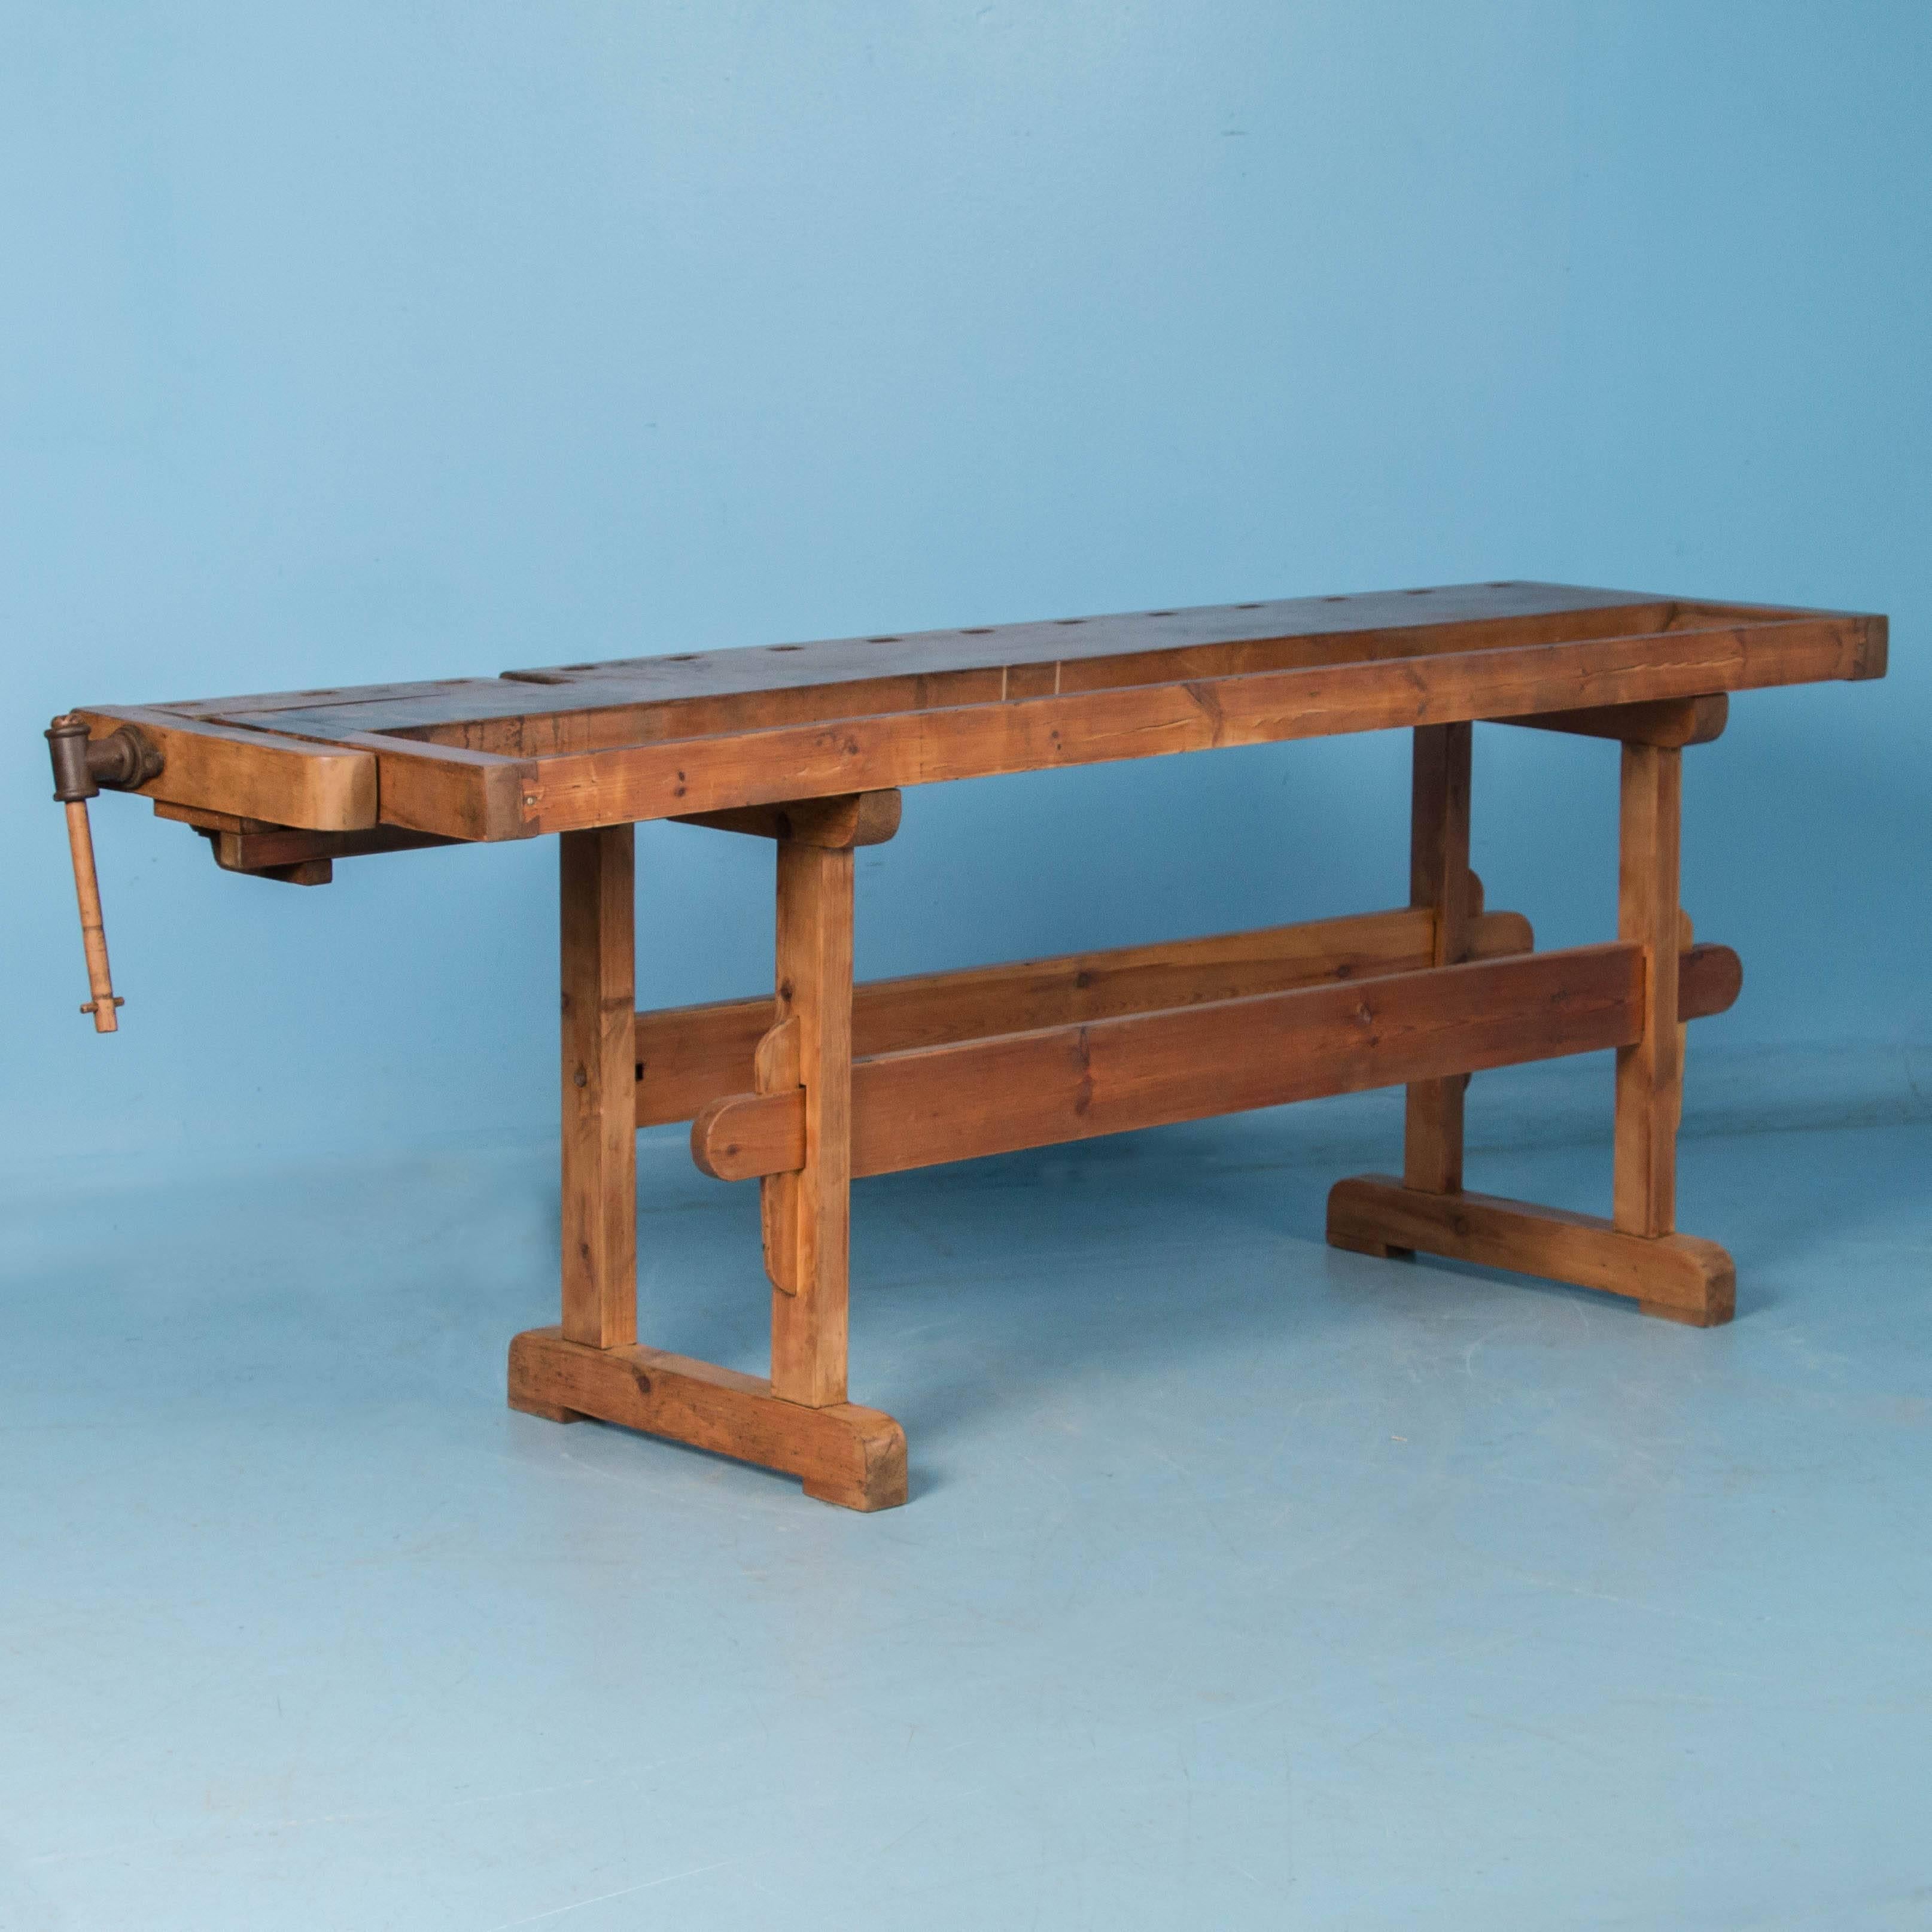 The wonderful wear and distressed wood add to the appeal of this circa 1900 workbench which features a working end vise and the original tool trough. The top is detachable and comes with a traditional trestle base that allows it to be assembled and